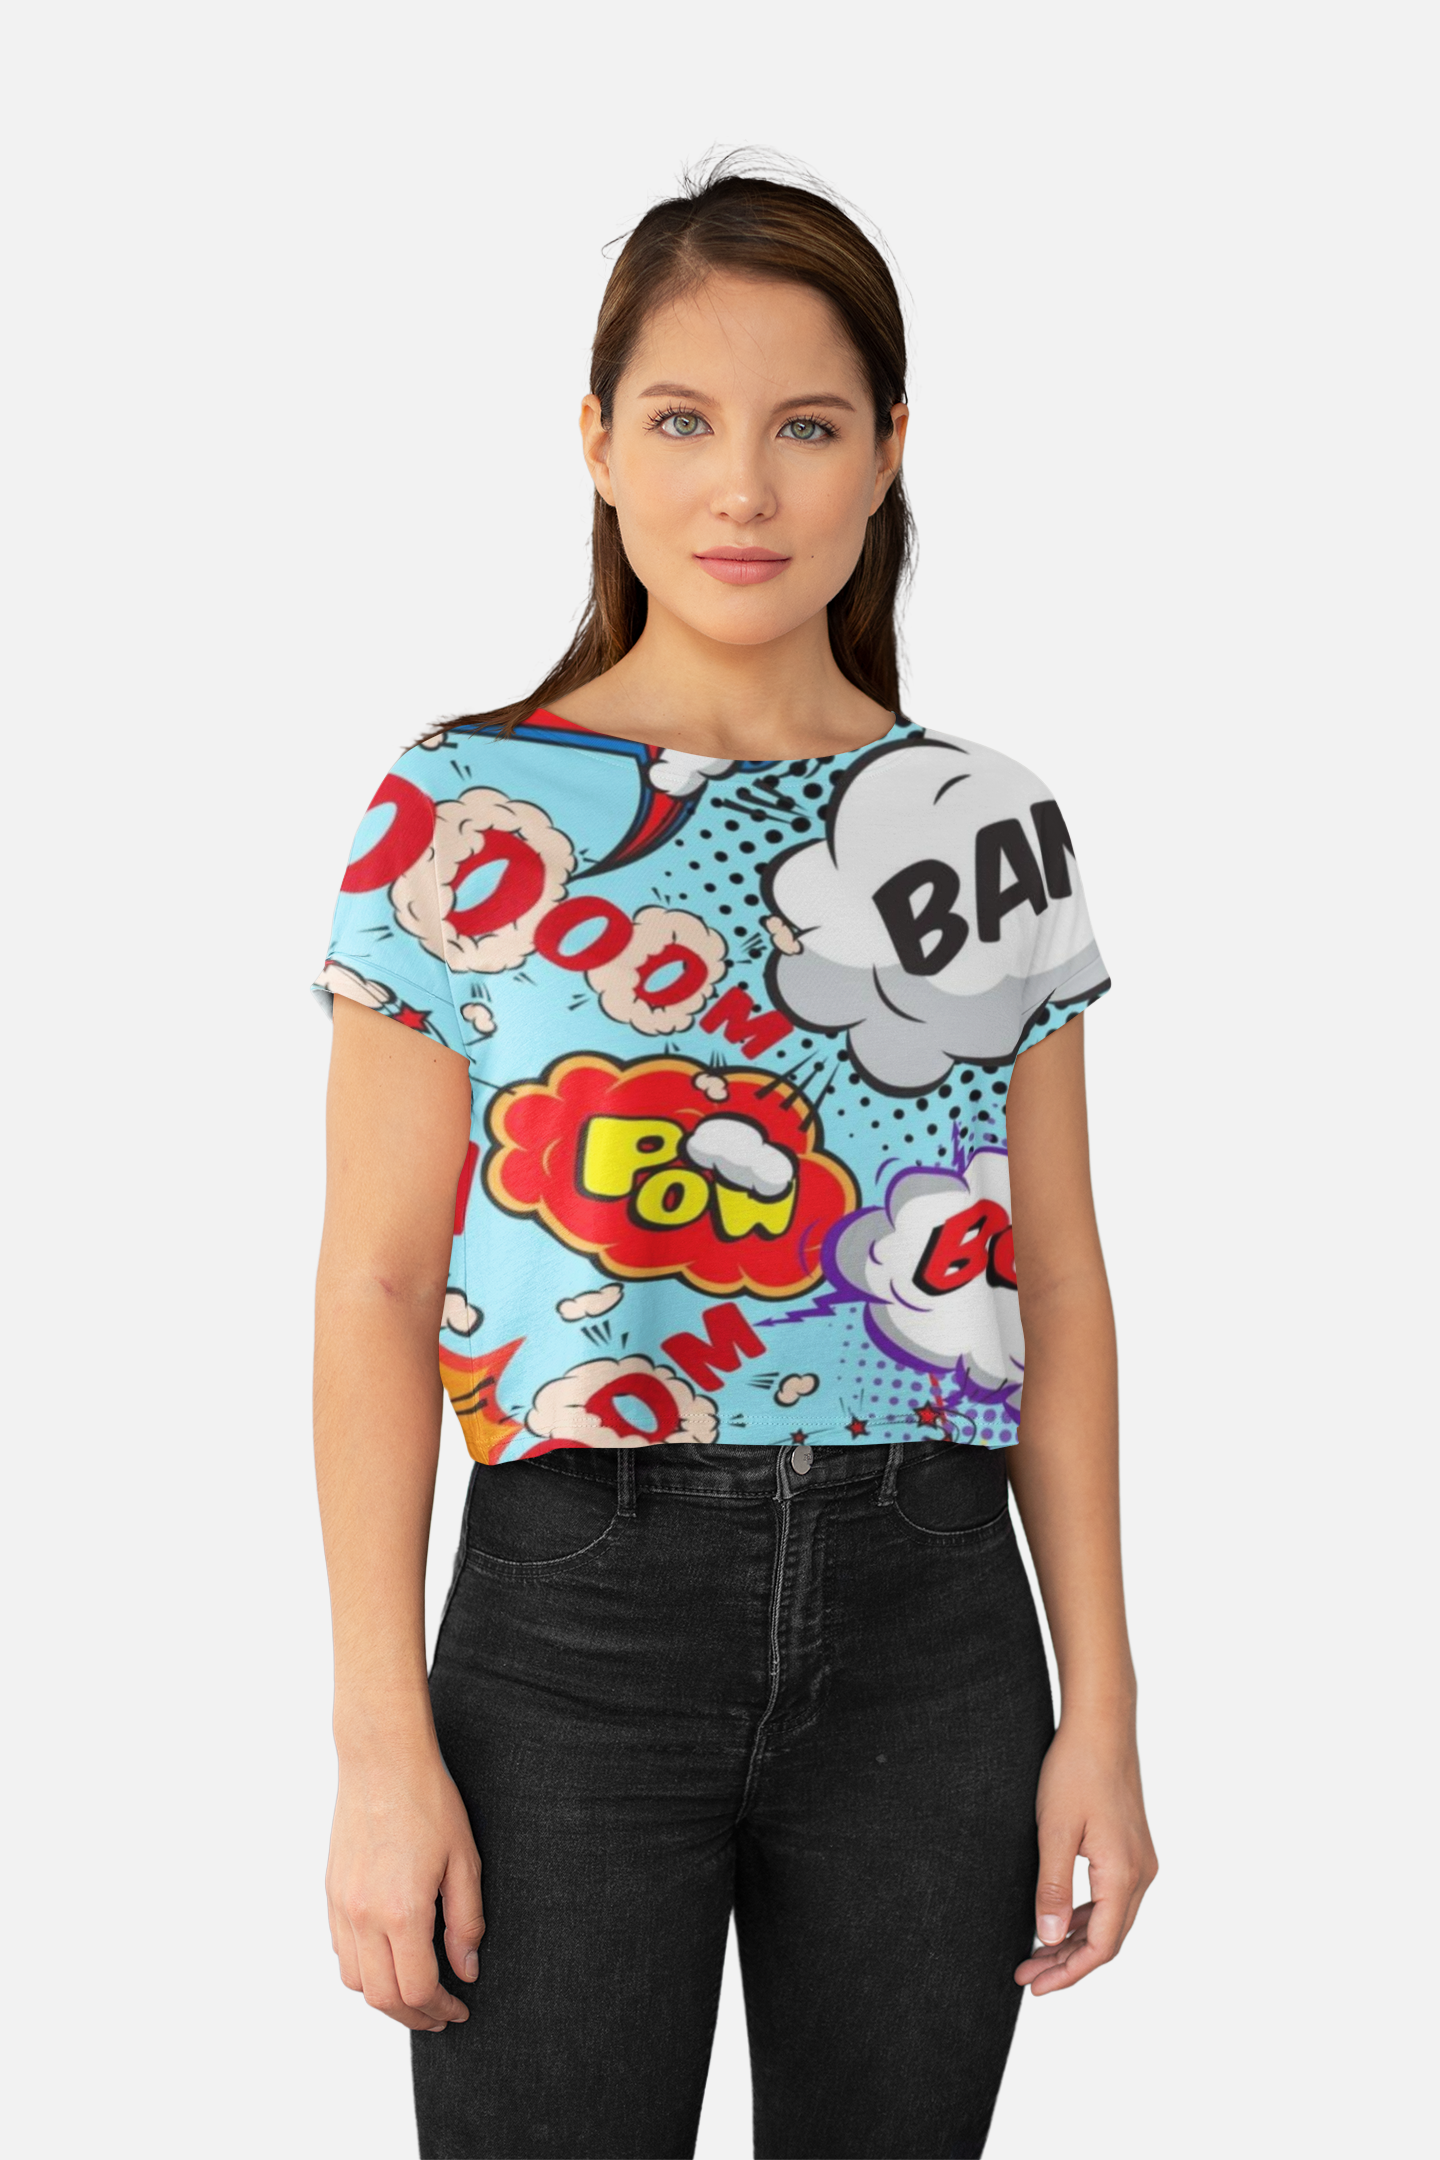 Comic Quotes Print Crop Top For Women